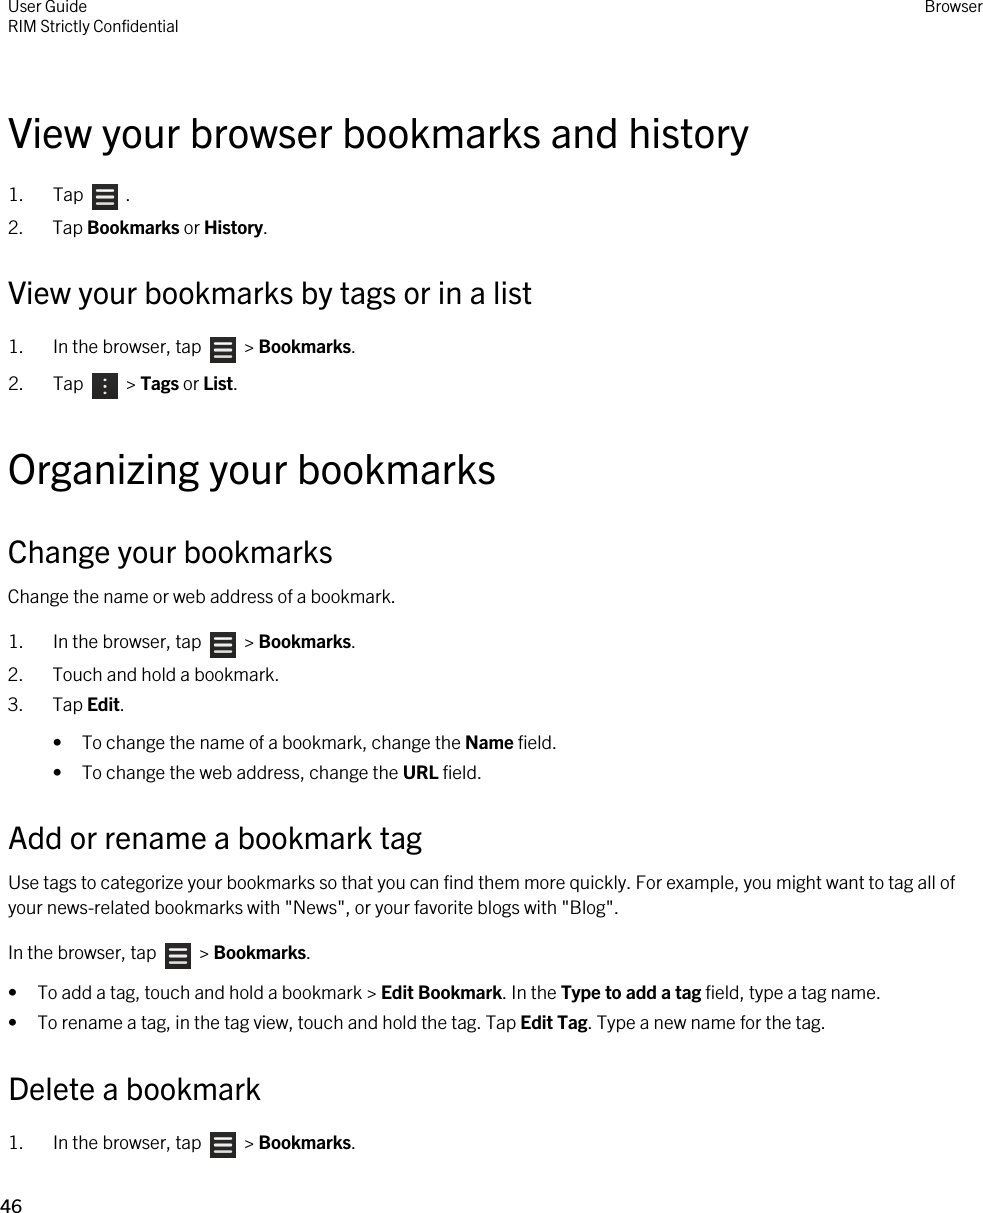 View your browser bookmarks and history1.  Tap    .2. Tap Bookmarks or History.View your bookmarks by tags or in a list1.  In the browser, tap    &gt; Bookmarks.2.  Tap    &gt; Tags or List.Organizing your bookmarksChange your bookmarksChange the name or web address of a bookmark.1.  In the browser, tap    &gt; Bookmarks.2. Touch and hold a bookmark.3. Tap Edit.• To change the name of a bookmark, change the Name field.• To change the web address, change the URL field.Add or rename a bookmark tagUse tags to categorize your bookmarks so that you can find them more quickly. For example, you might want to tag all of your news-related bookmarks with &quot;News&quot;, or your favorite blogs with &quot;Blog&quot;.In the browser, tap    &gt; Bookmarks.• To add a tag, touch and hold a bookmark &gt; Edit Bookmark. In the Type to add a tag field, type a tag name.• To rename a tag, in the tag view, touch and hold the tag. Tap Edit Tag. Type a new name for the tag.Delete a bookmark1.  In the browser, tap    &gt; Bookmarks.User GuideRIM Strictly ConfidentialBrowser46 